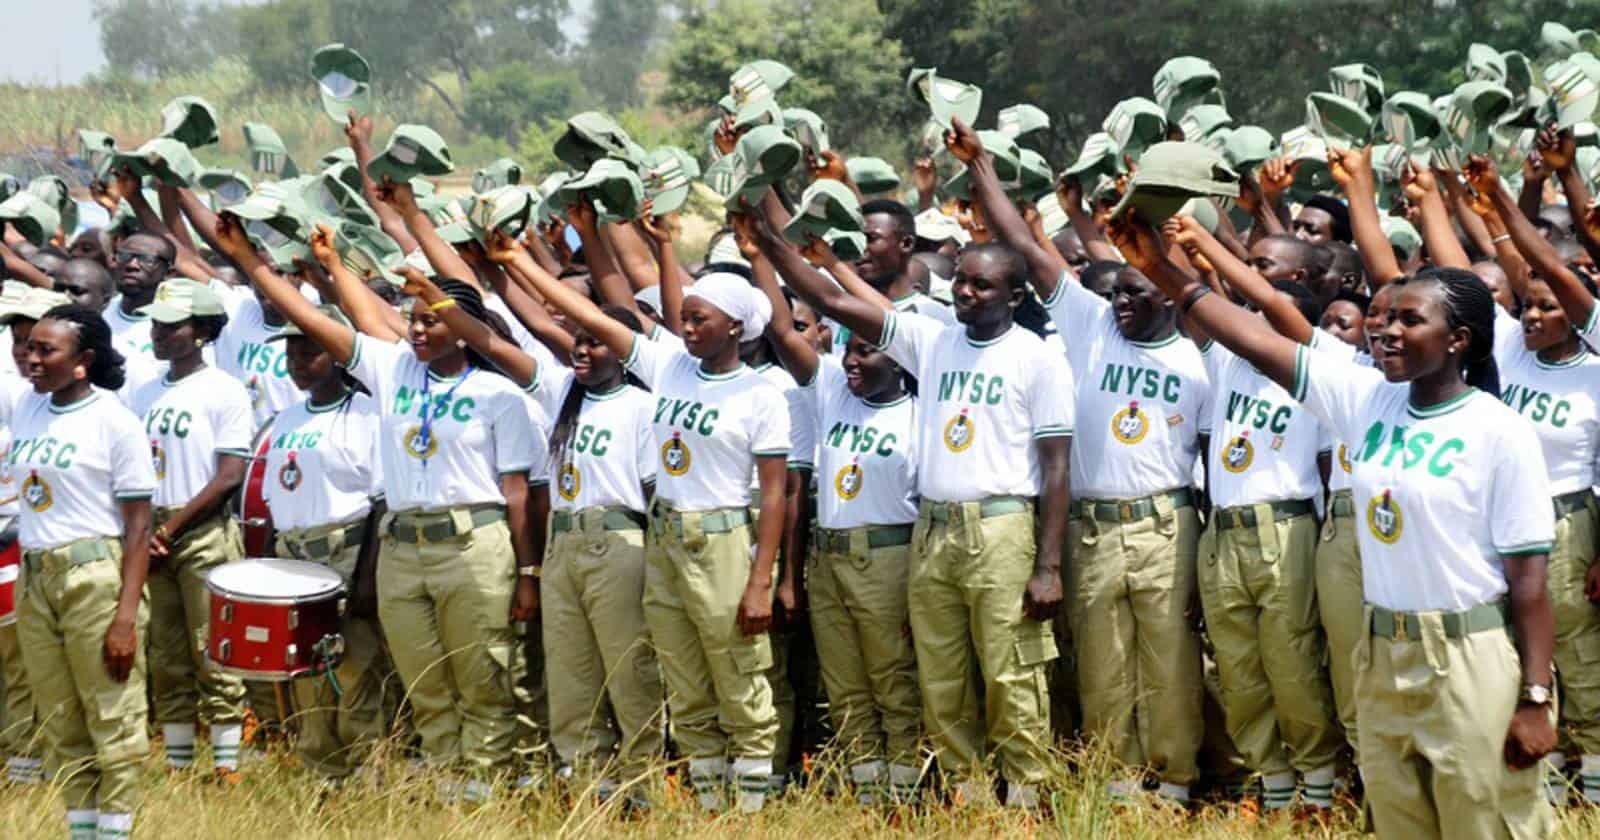 Locations and Addresses of NYSC Orientation Camps Nationwide